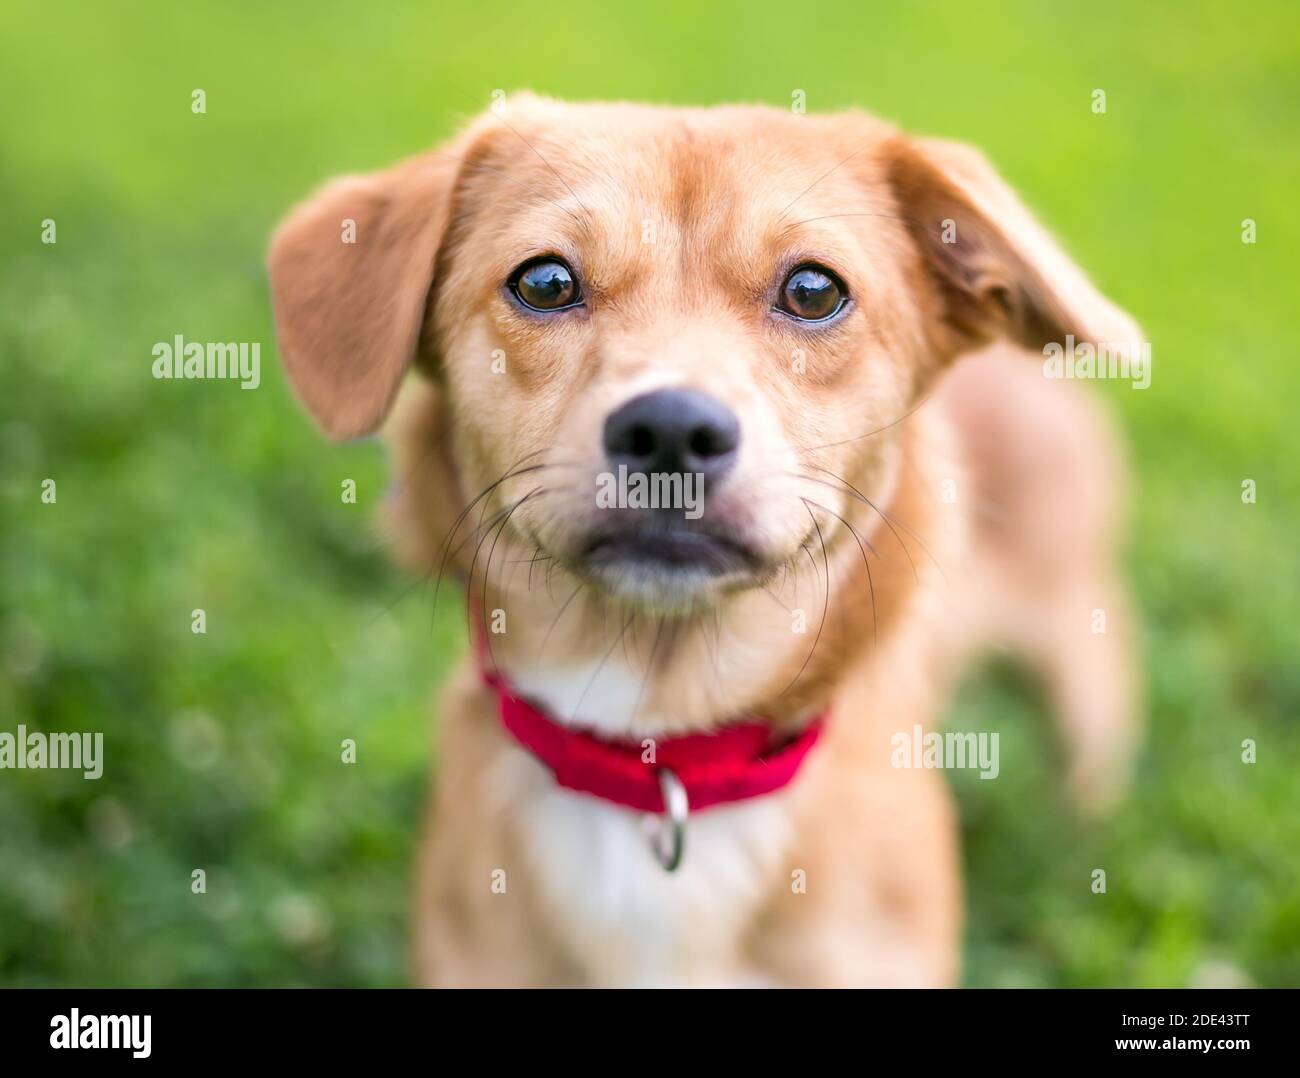 A cute brown mixed breed dog with floppy ears, wearing a red collar Stock Photo